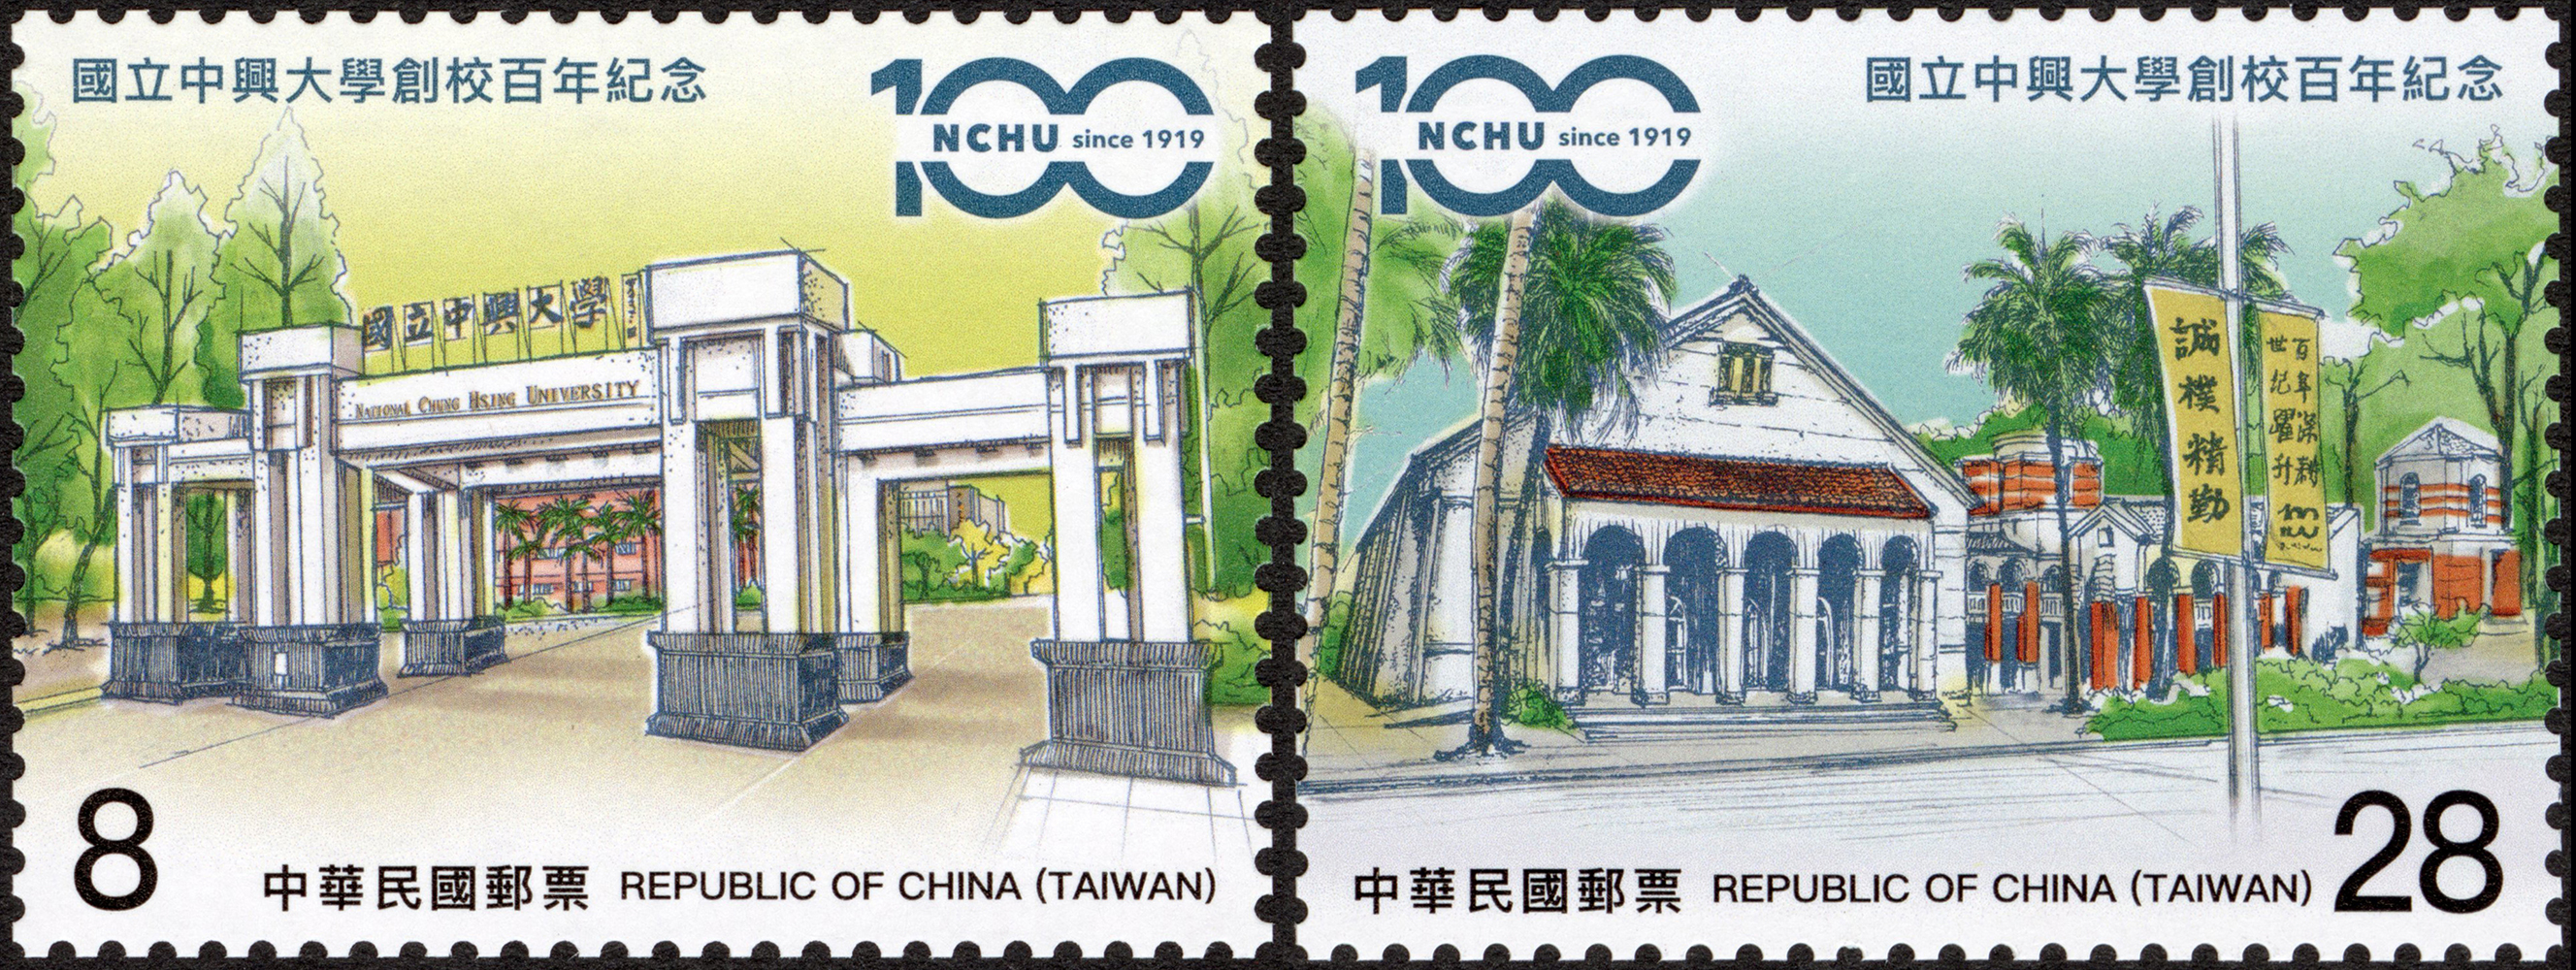 National Chung Hsing University 100th Anniversary Commemorative Issue